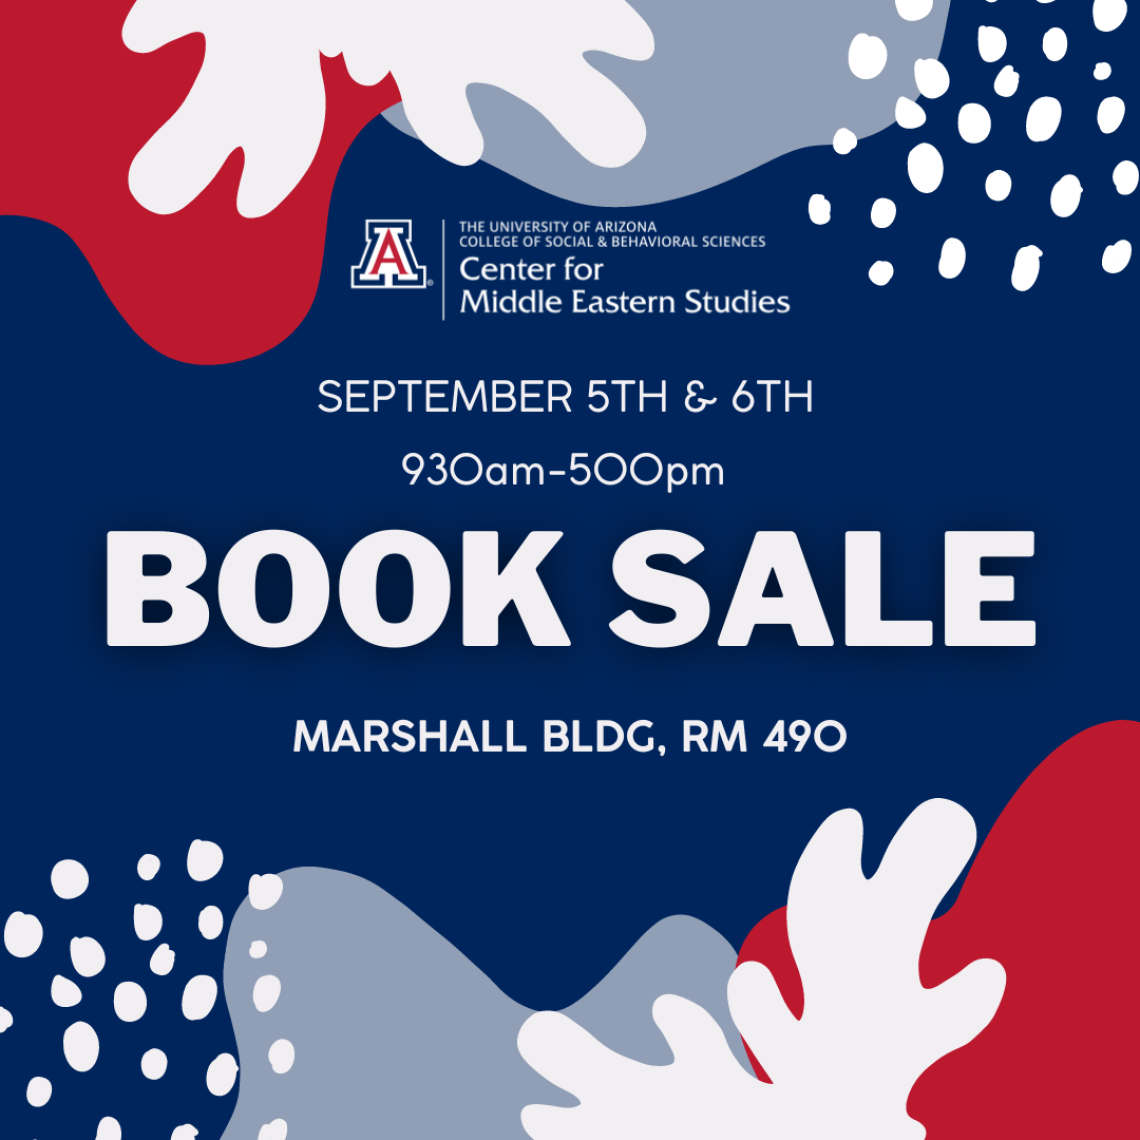 Book Sale September 5th and 6th Marshall Bldg 490